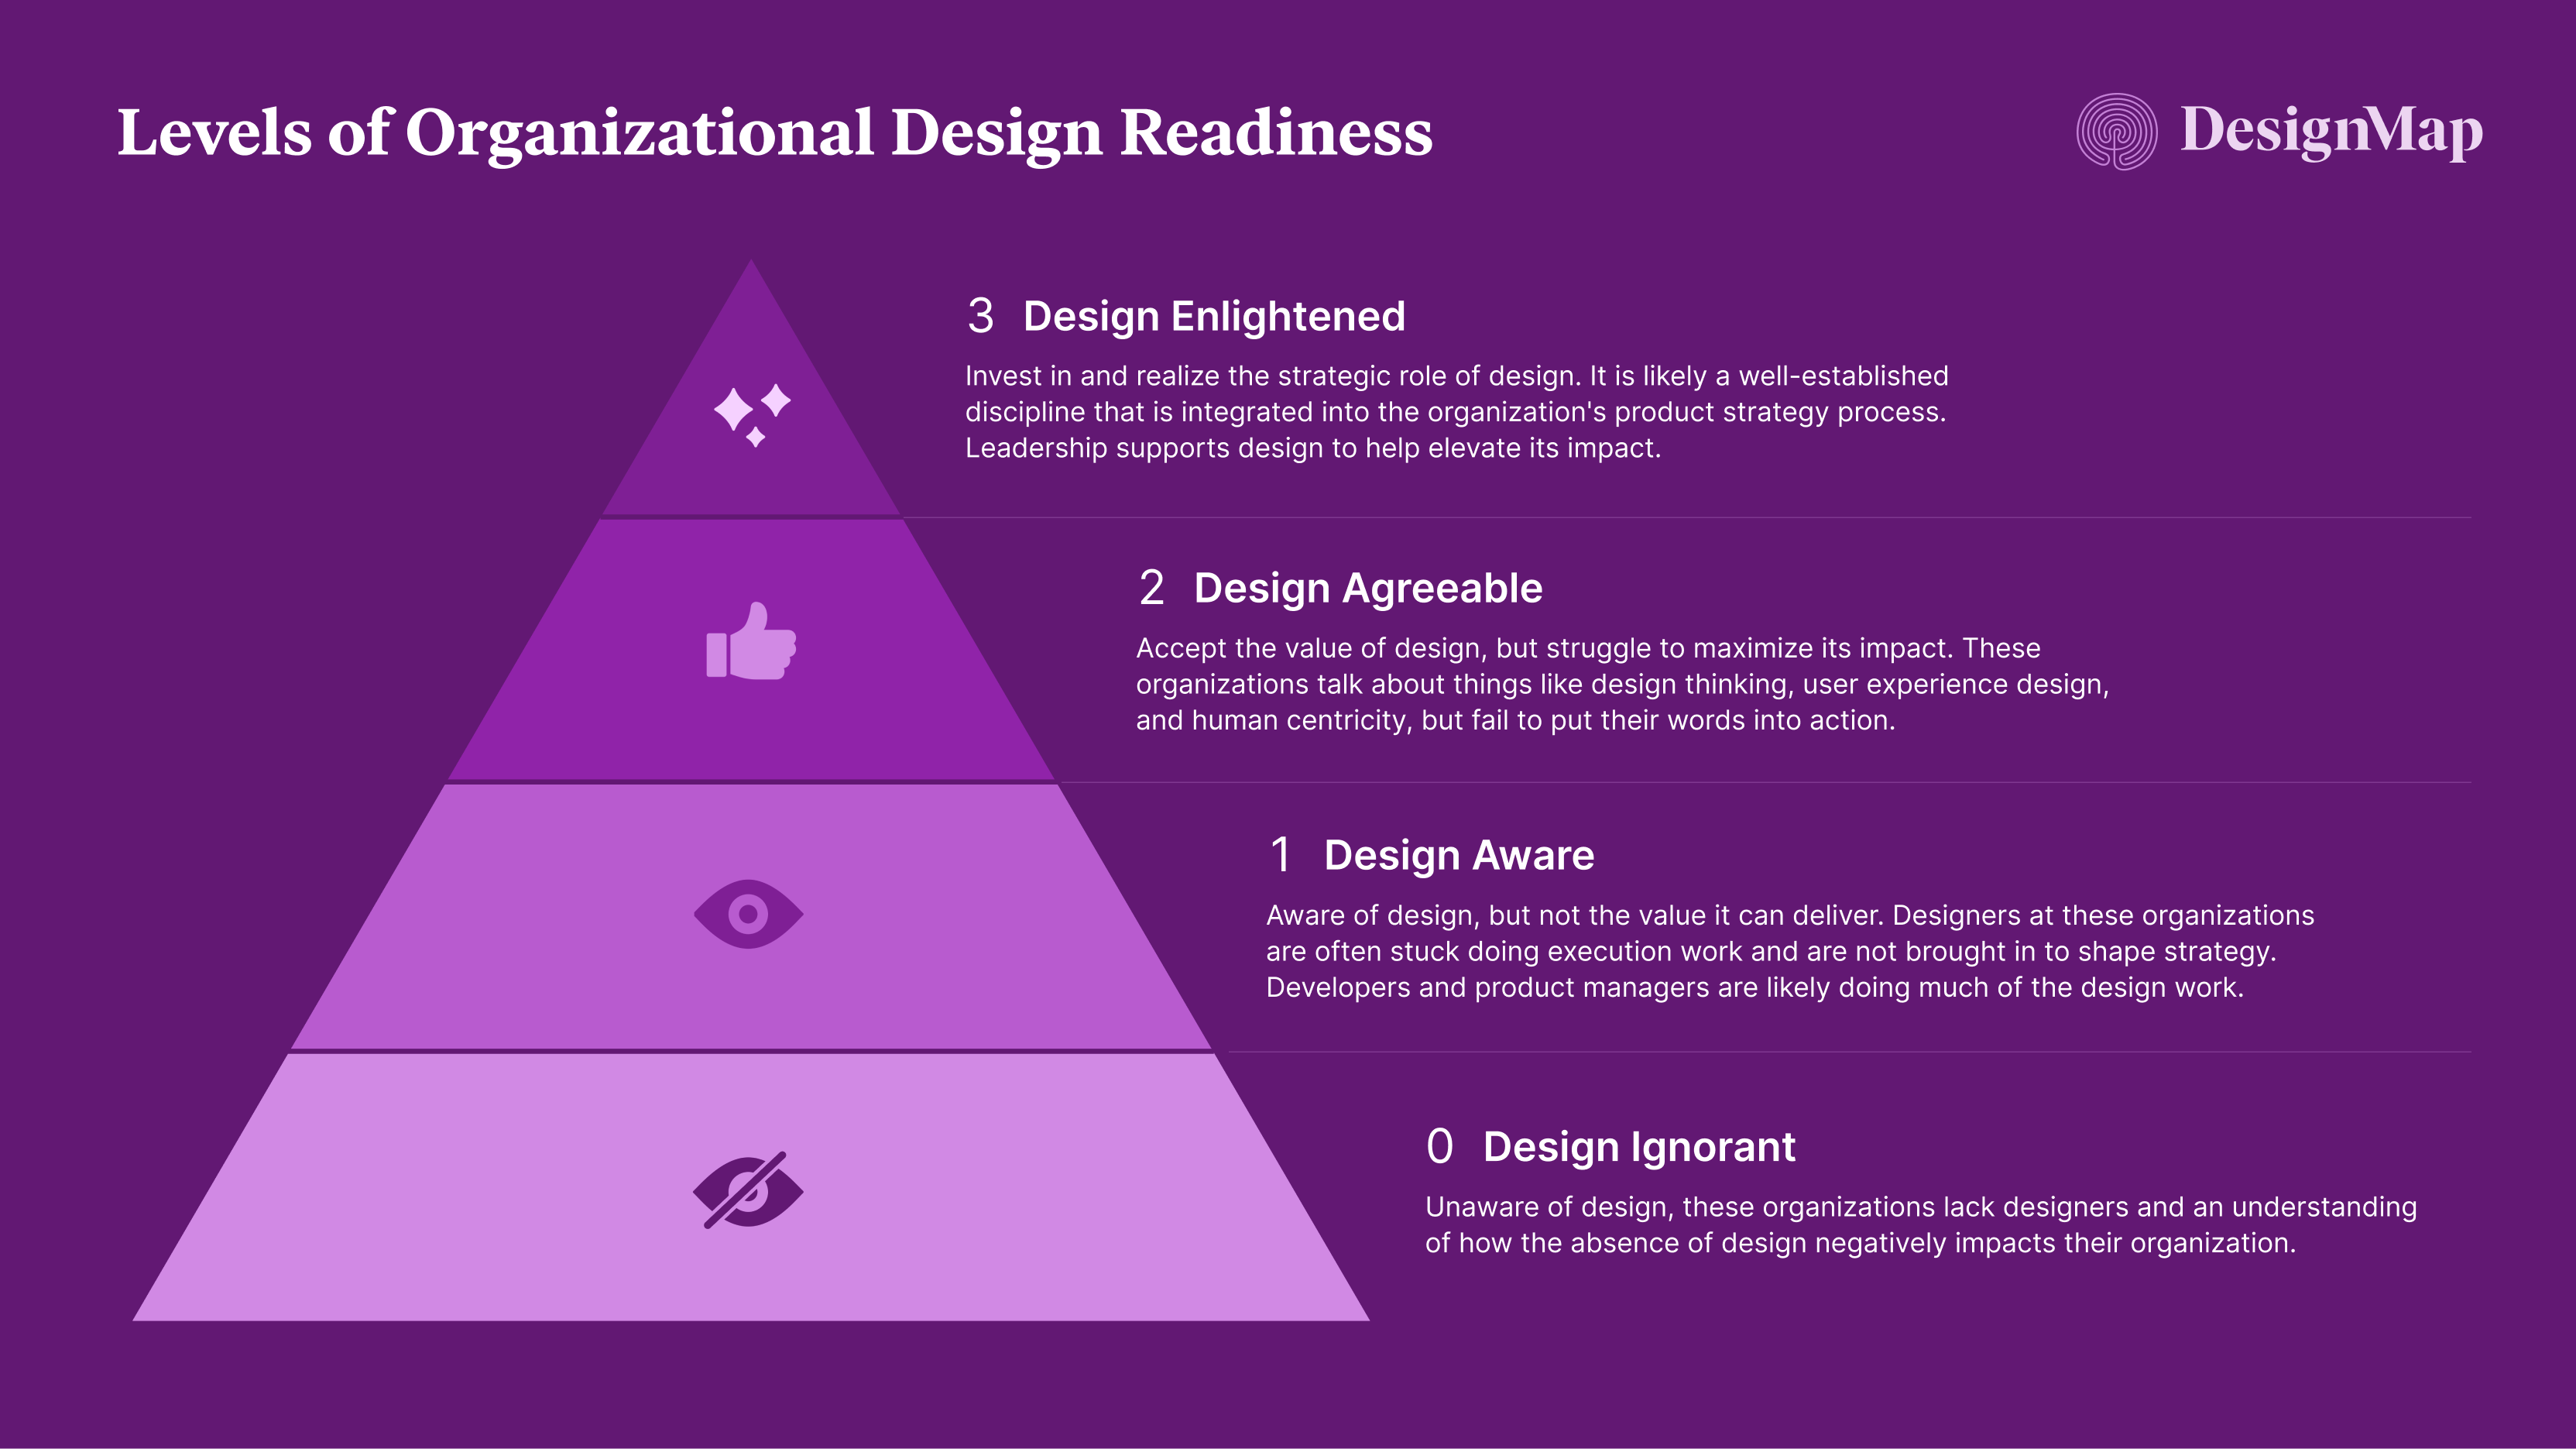 Levels of Organizational Design Readiness. Level 0 - Design Ignorant: Unaware of design, these organizations lack designers and an understanding of how the absence of design negatively impacts their organization. Level 1 - Design Aware: Aware of design, but not the value it can deliver. Designers at these organizations are often stuck doing execution work and are not brought in to shape strategy. Developers and product managers are likely doing much of the design work. Level 2 - Design Agreeable: Accept the value of design, but struggle to maximize its impact. These organizations talk about things like design thinking, user experience design, and human centricity, but fail to put their words into action. Level 3 - Design Enlightened: Invest in and realize the strategic role of design. It is likely a well-established discipline that is integrated into the organization's product strategy process. Leadership supports design to help elevate its impact.  